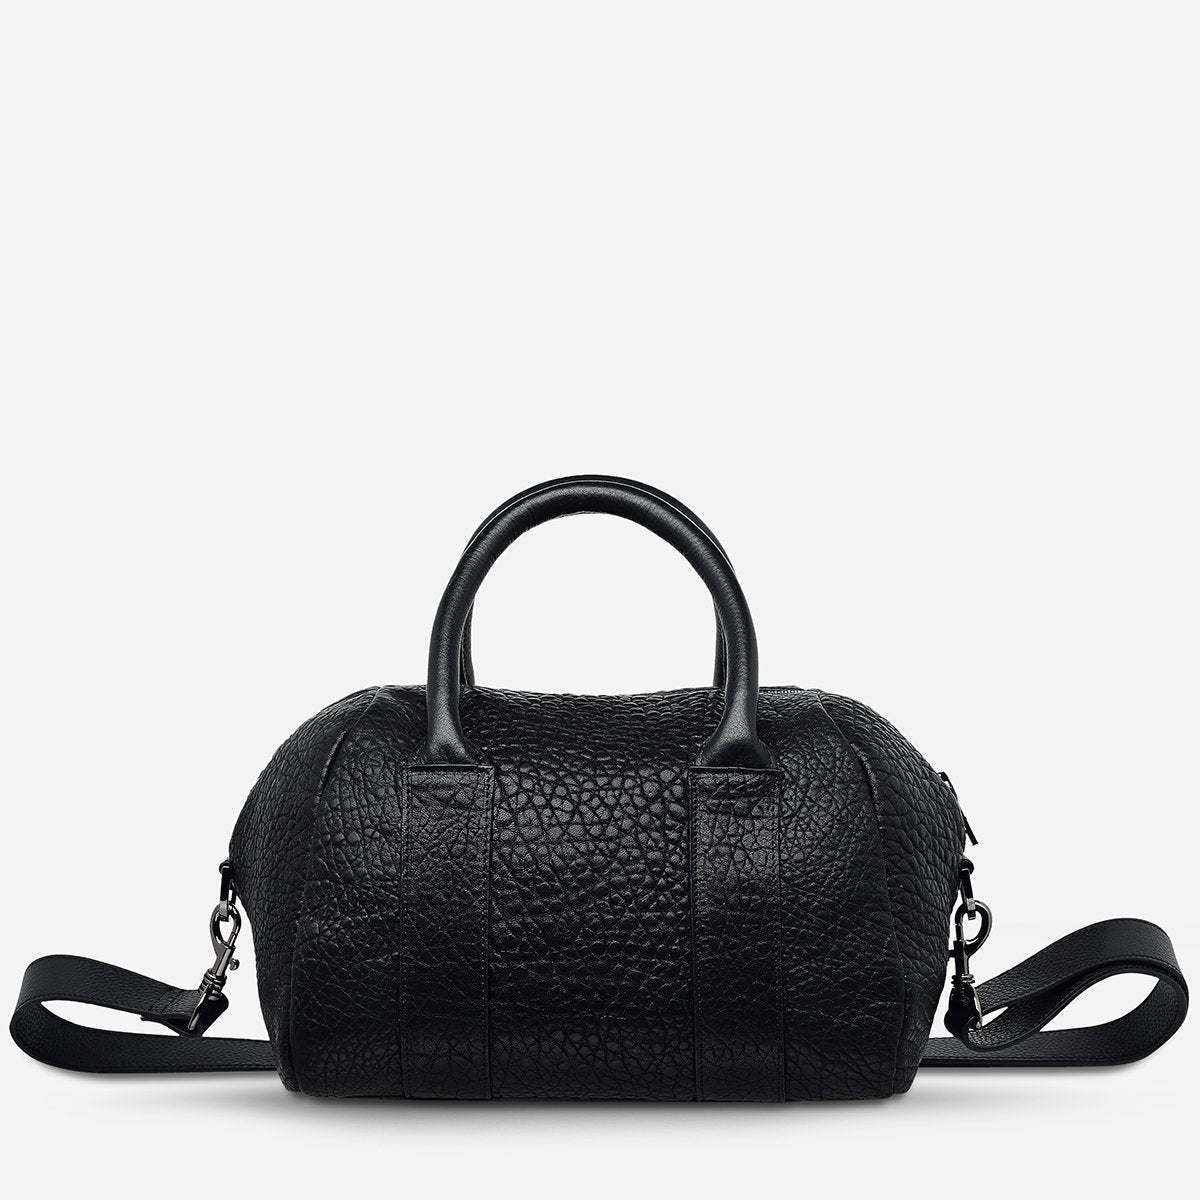 Status Anxiety bag - As She Pleases - Black Bubble